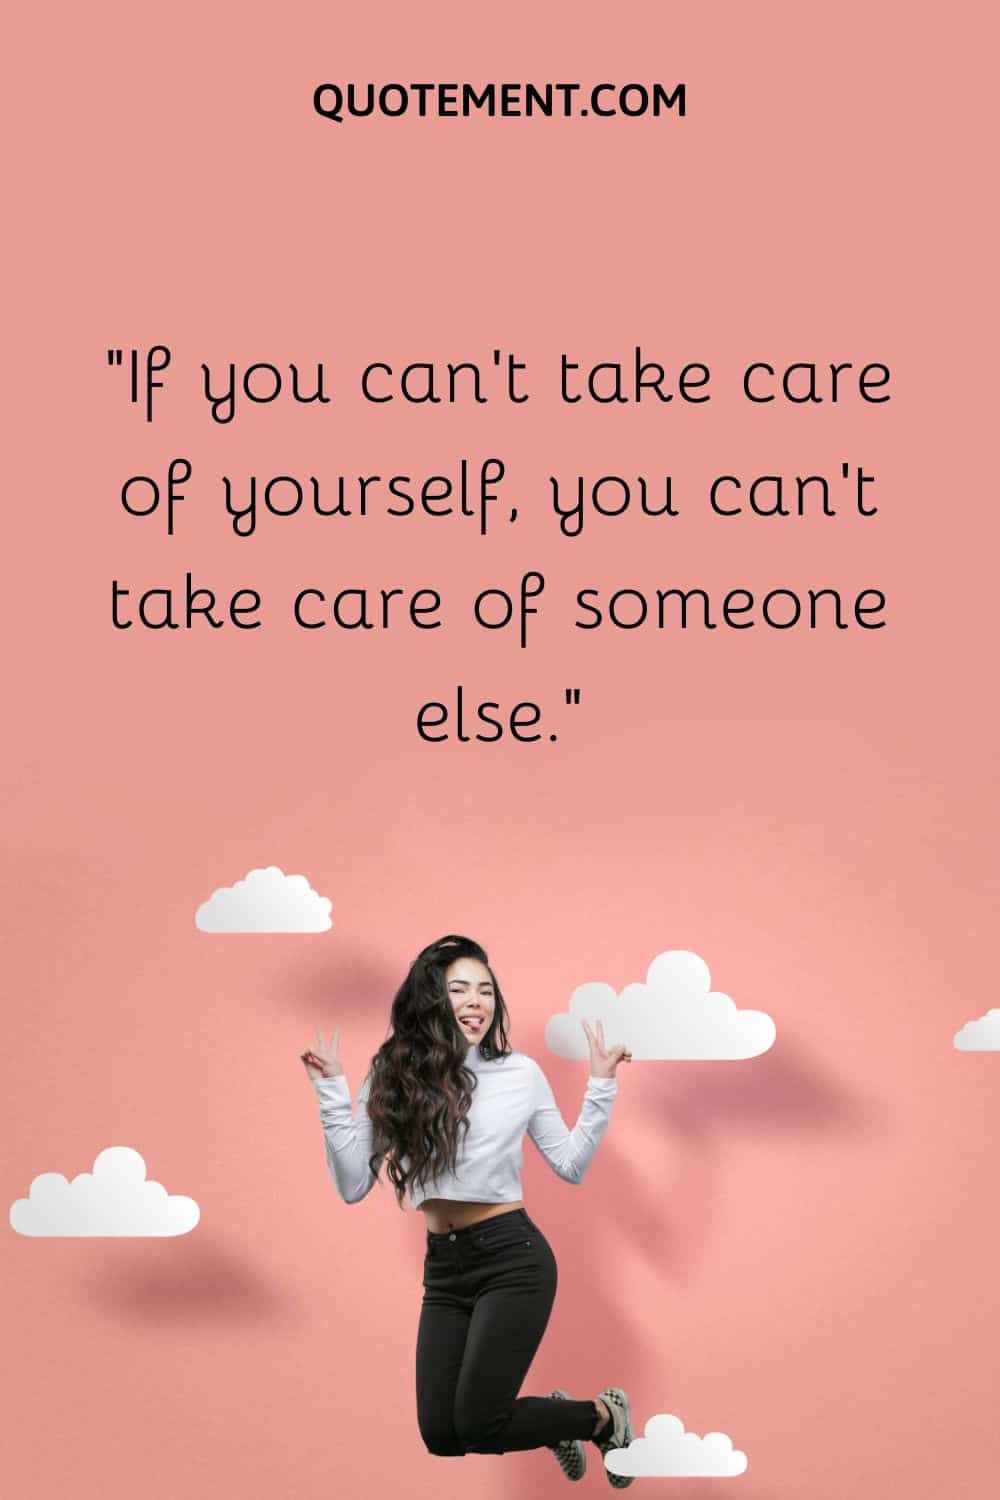 If you can’t take care of yourself, you can’t take care of someone else